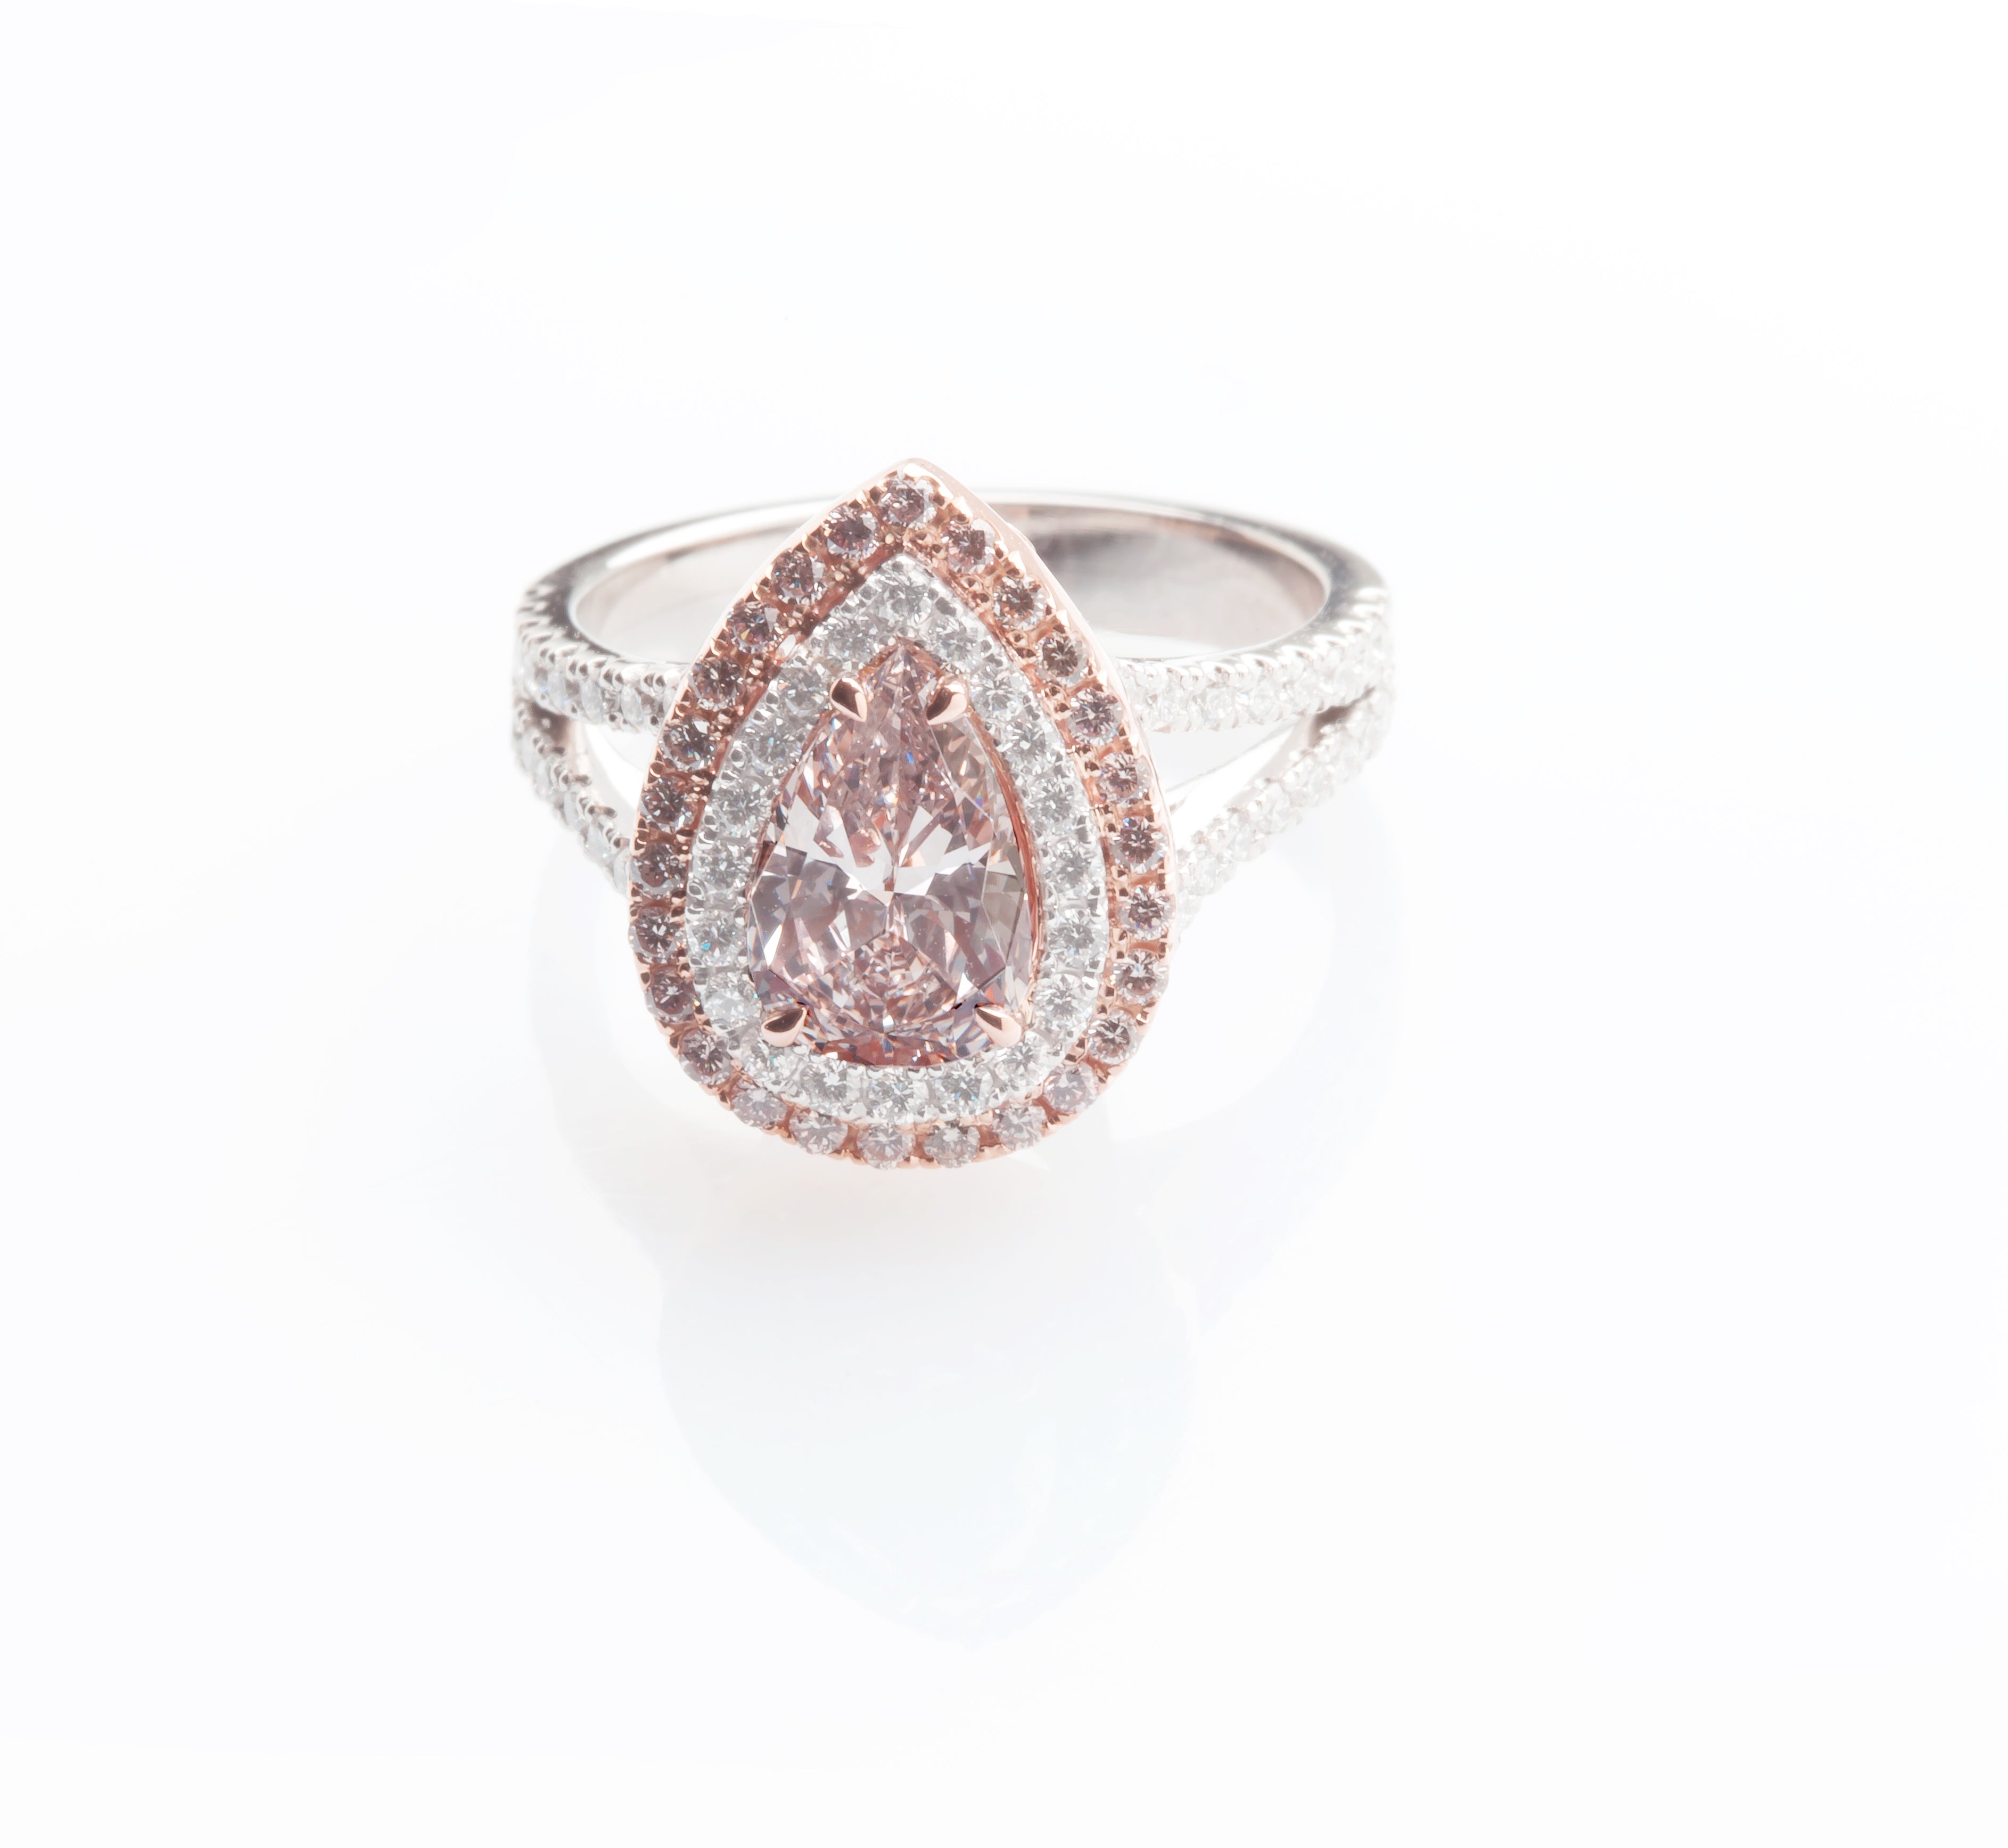 Split-shank Pink diamond engagement ring with double halo by Langerman Diamonds.